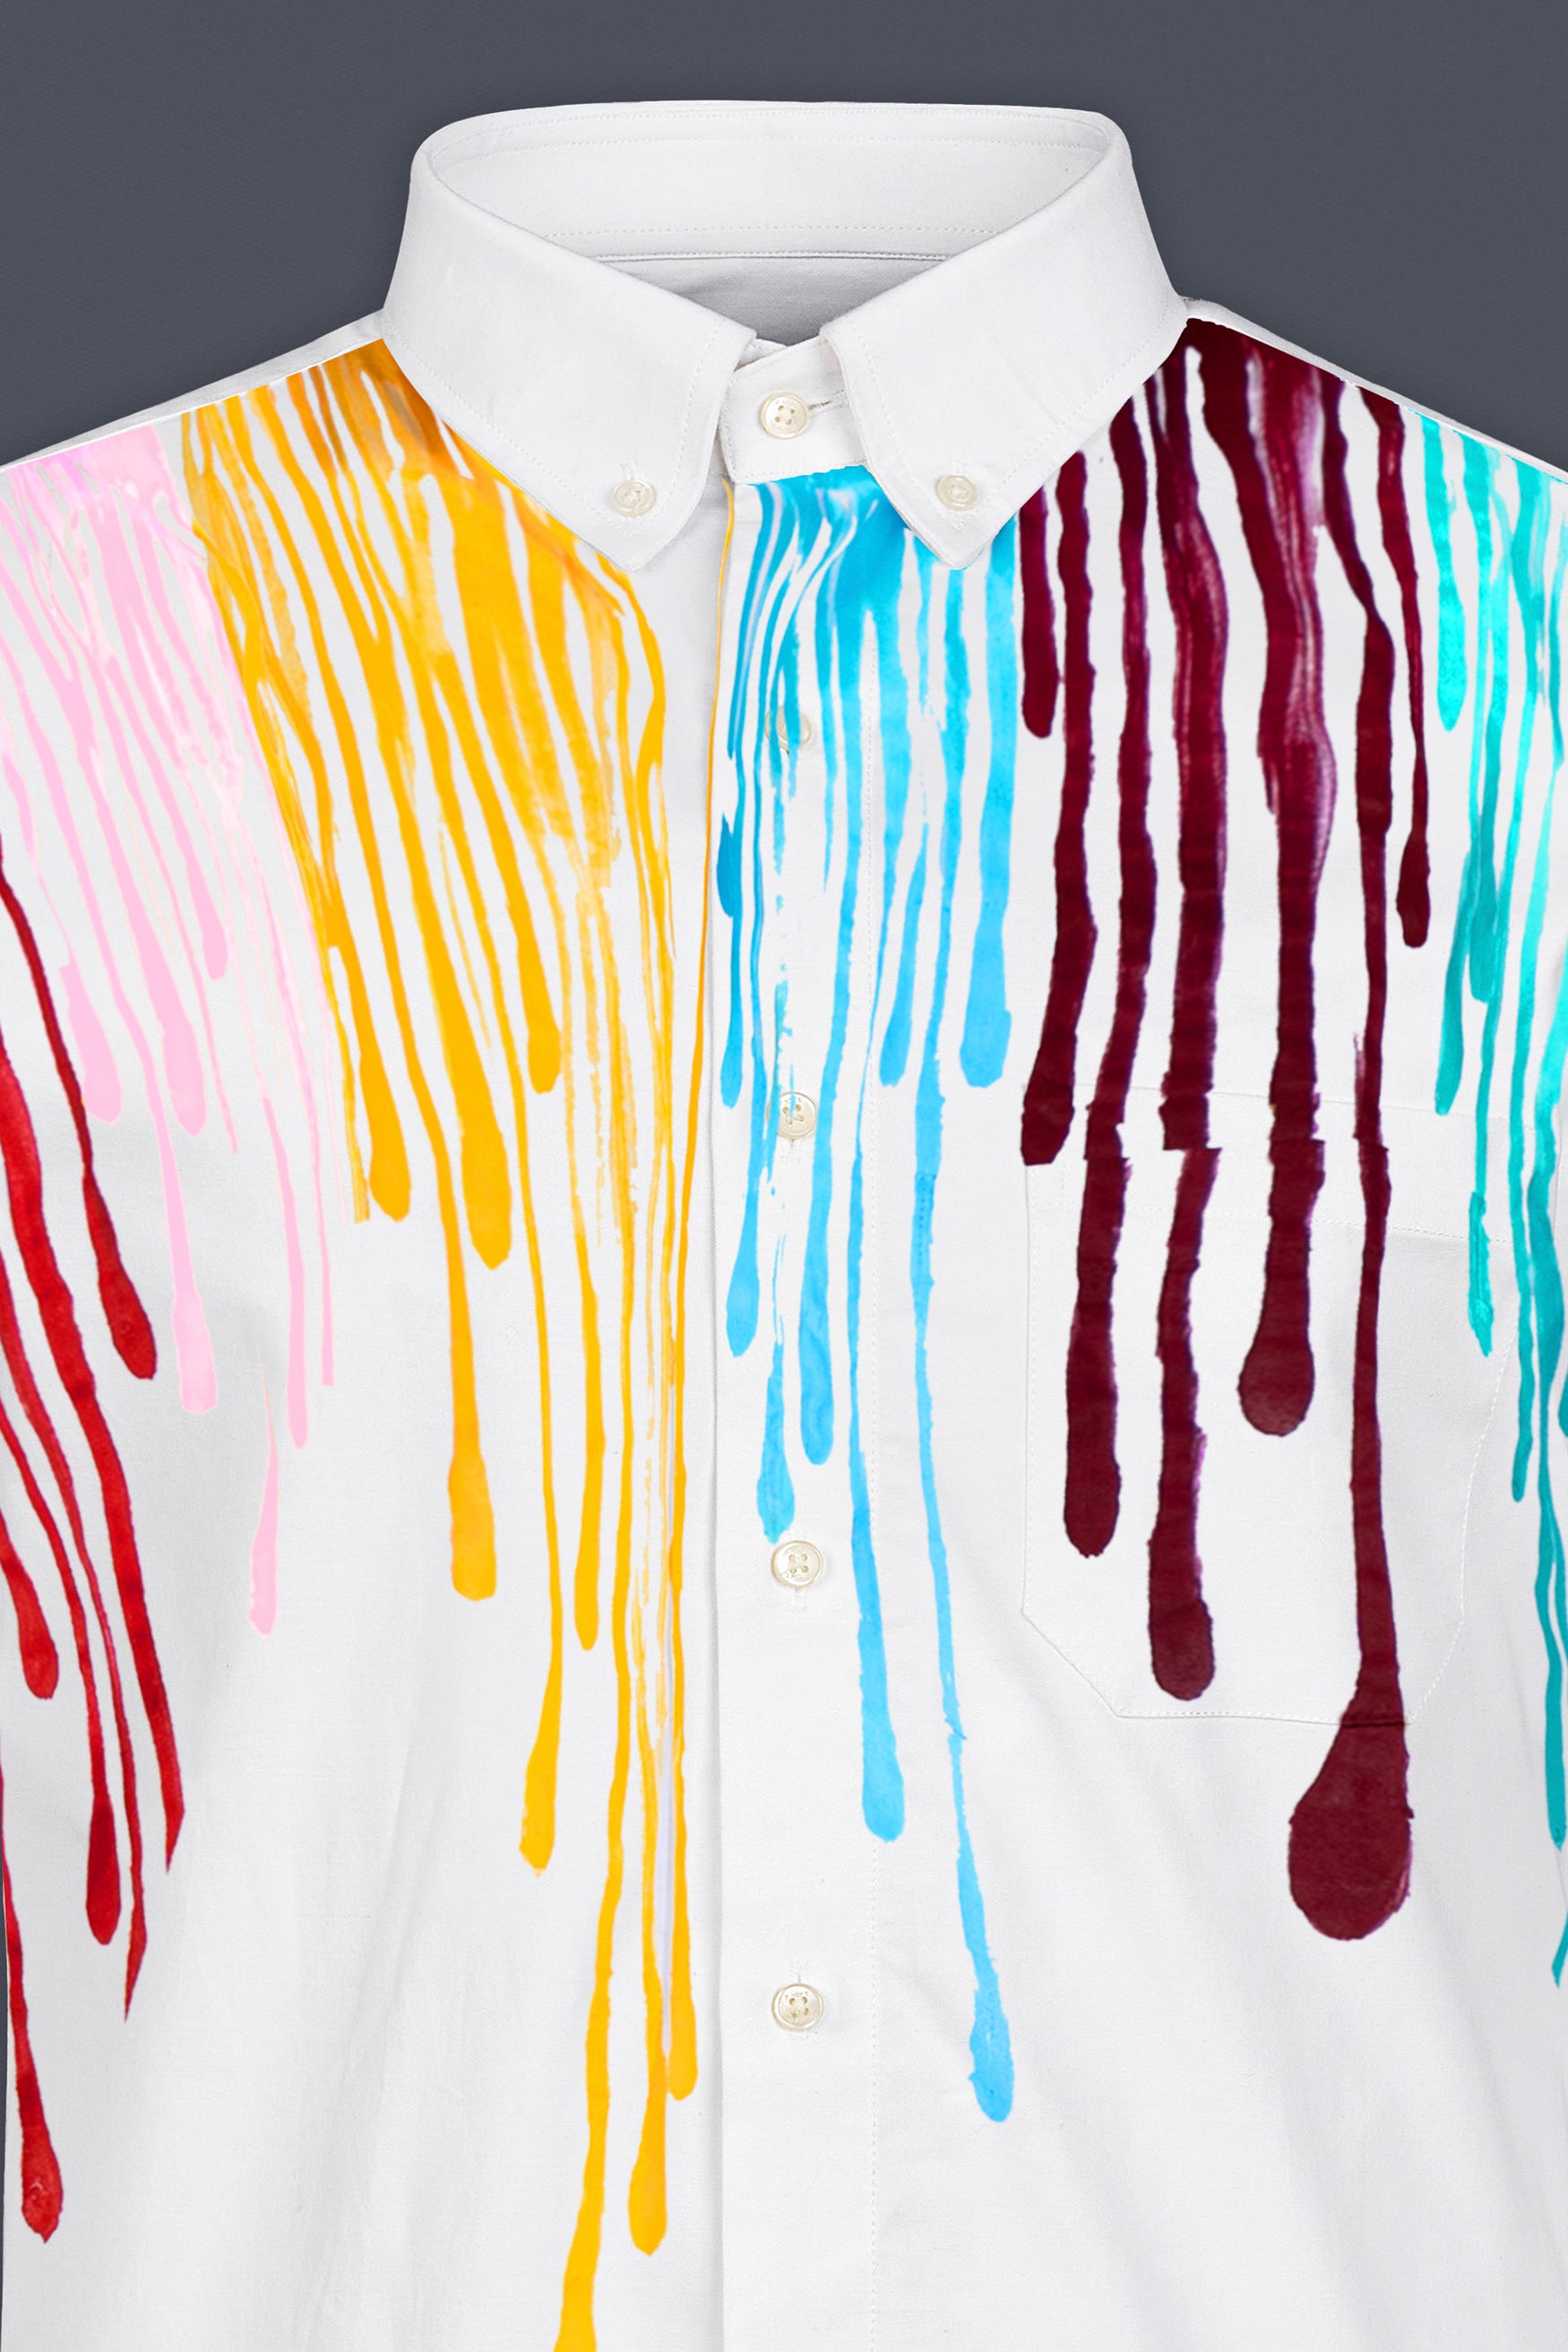 Bright White Melting Color Effect Hand Painted Royal Oxford Shirt